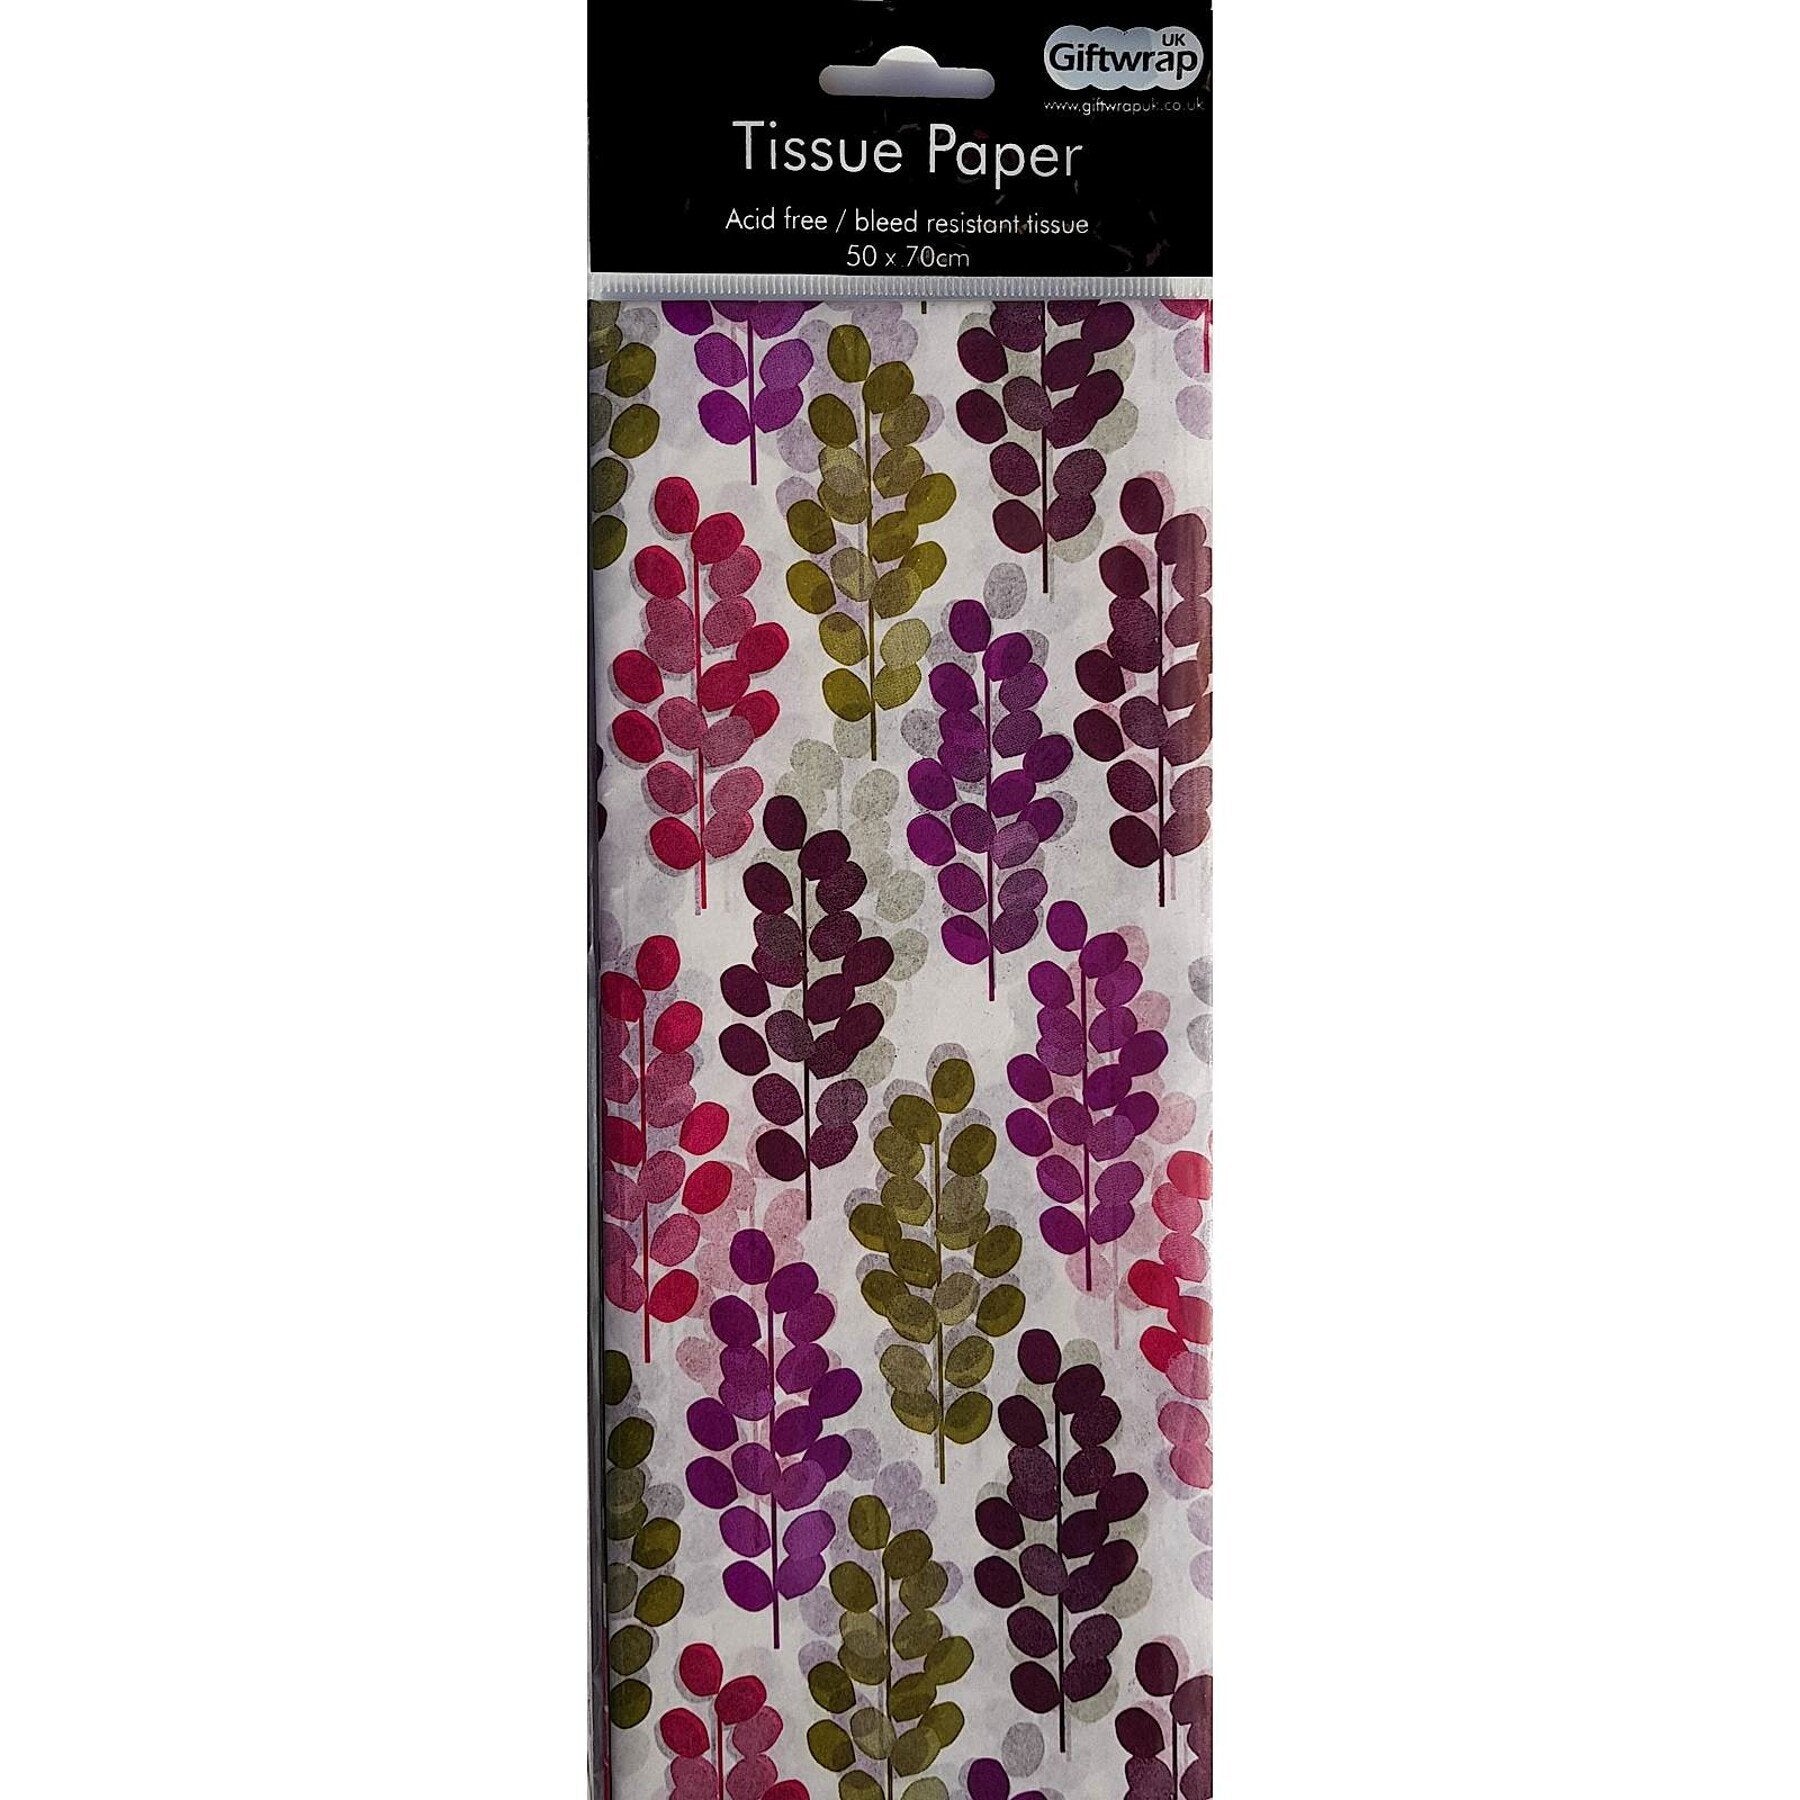 Grape Patterned Acid Free Tissue Paper (3 Sheets per Pack)